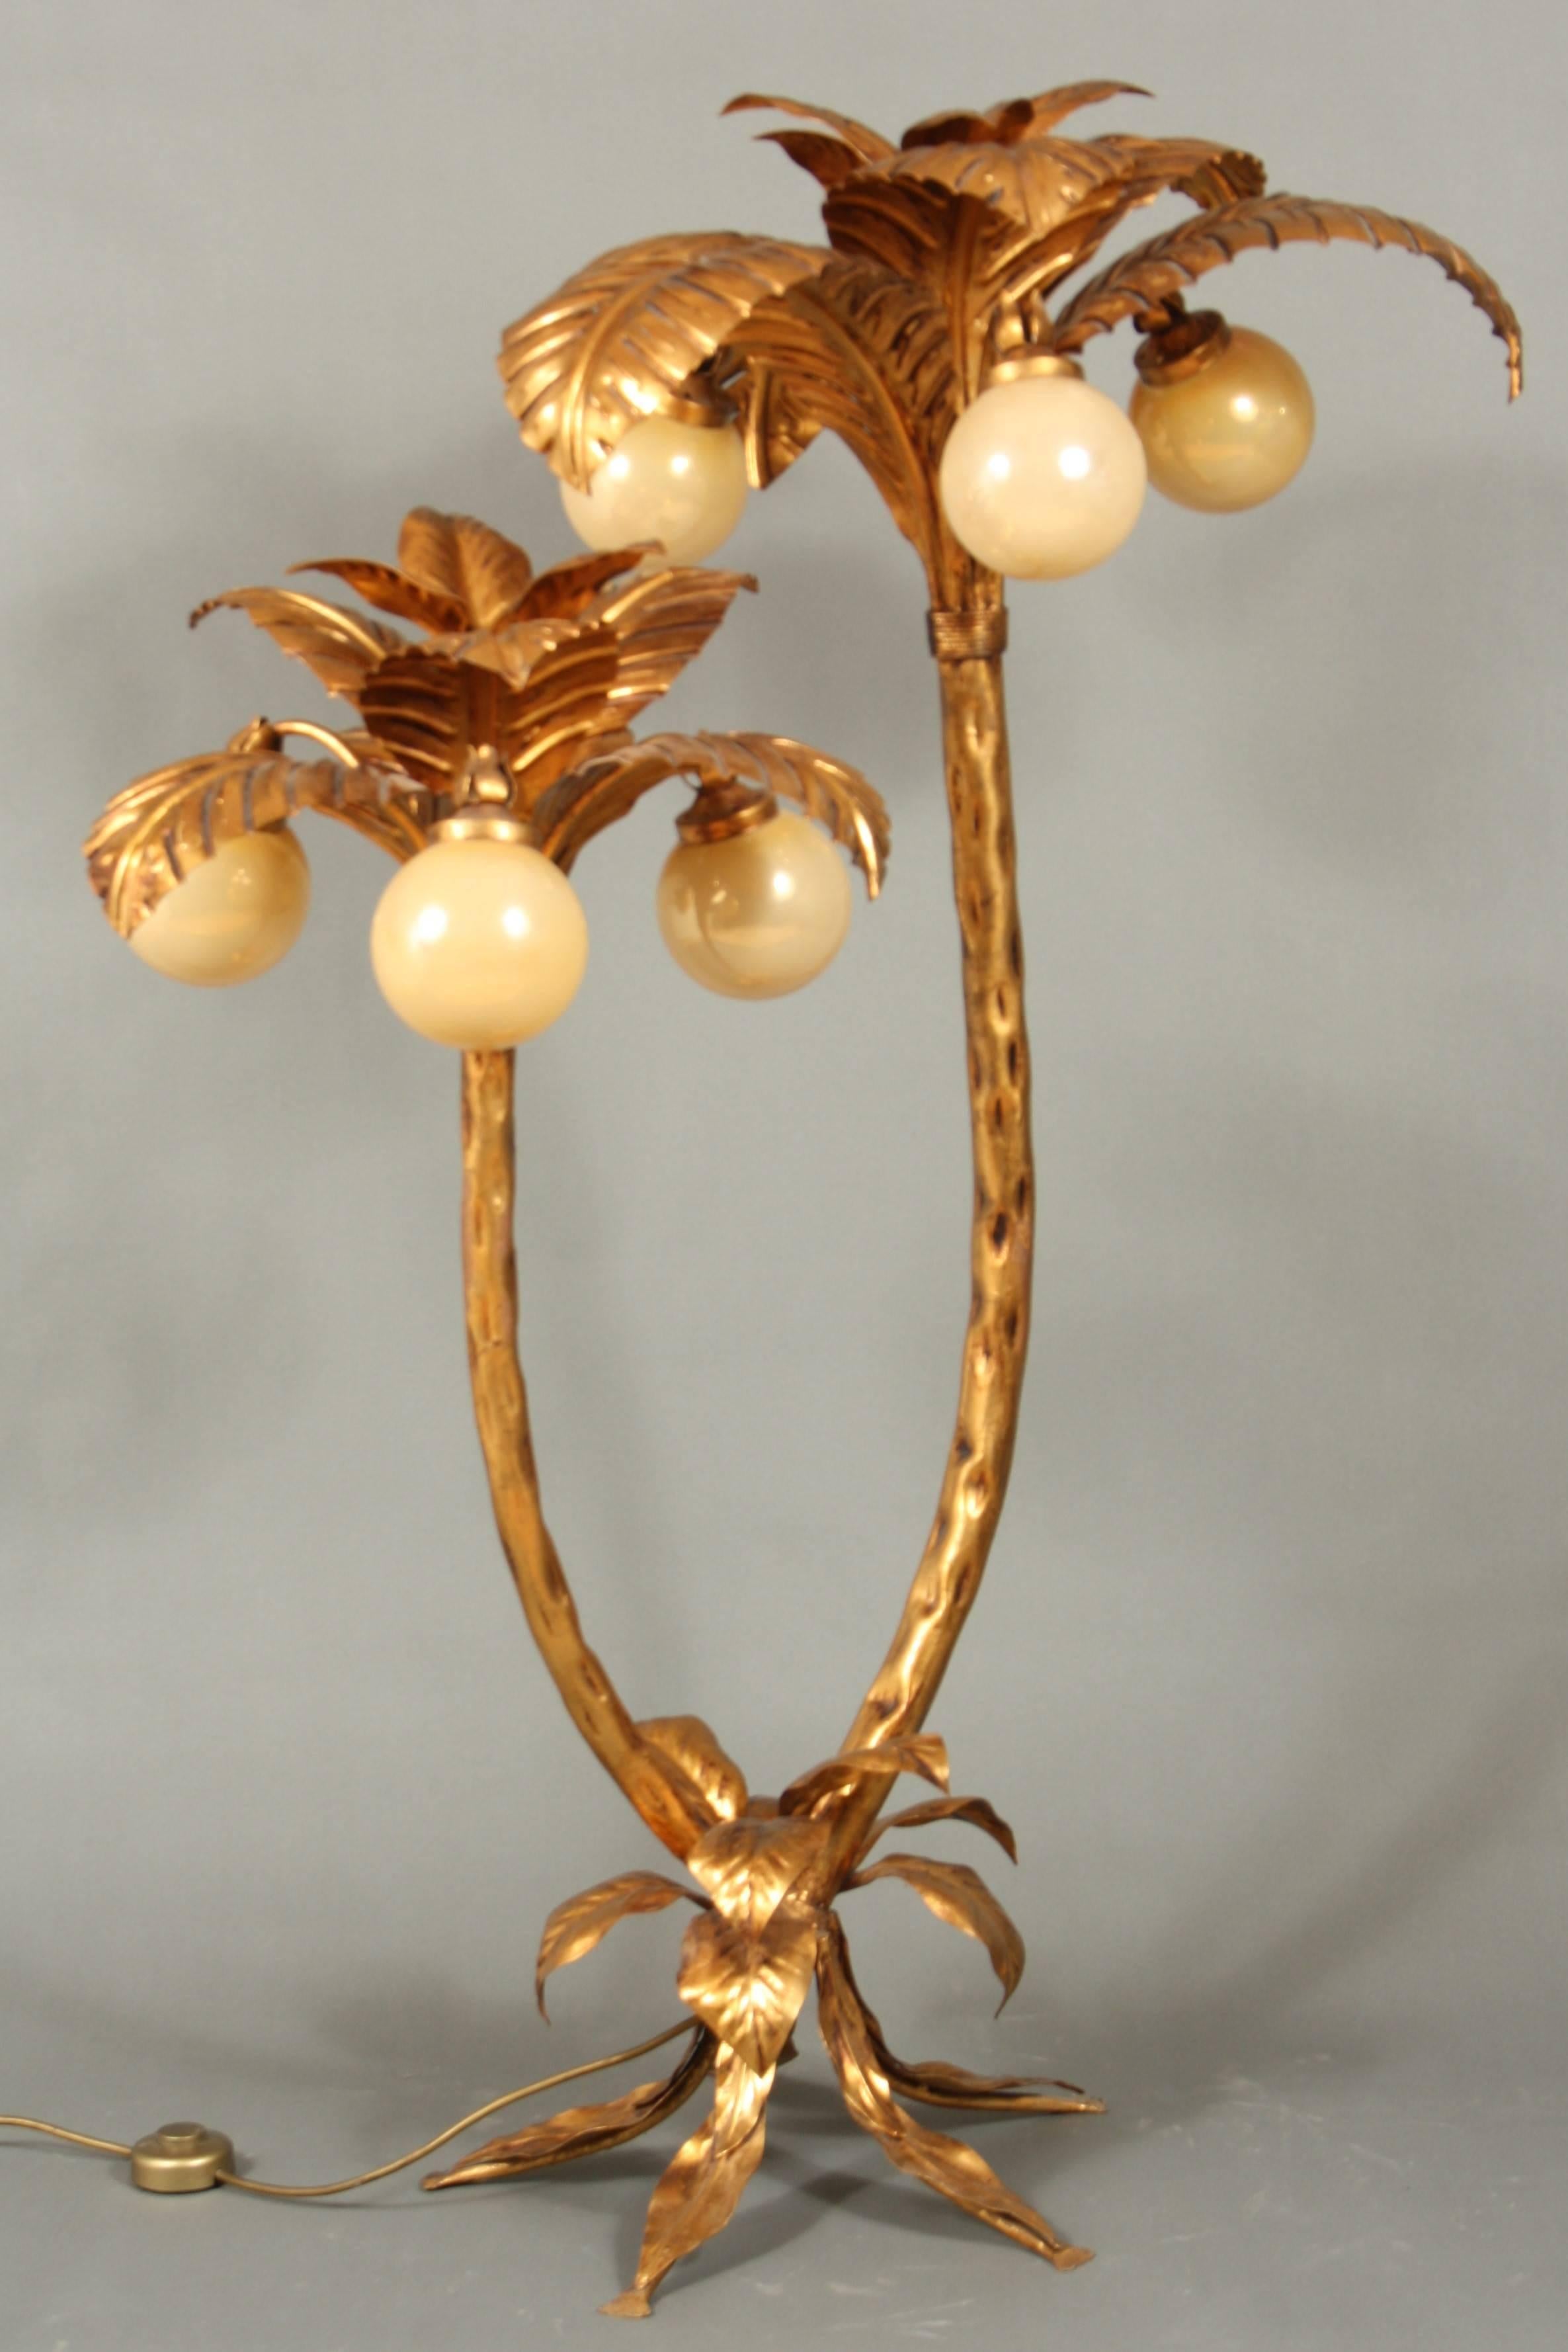 Palm tree floor lamp with six original very beautiful frosted globes. The palm has two trunks.
A really unique and fantastic lamp for a nice home.